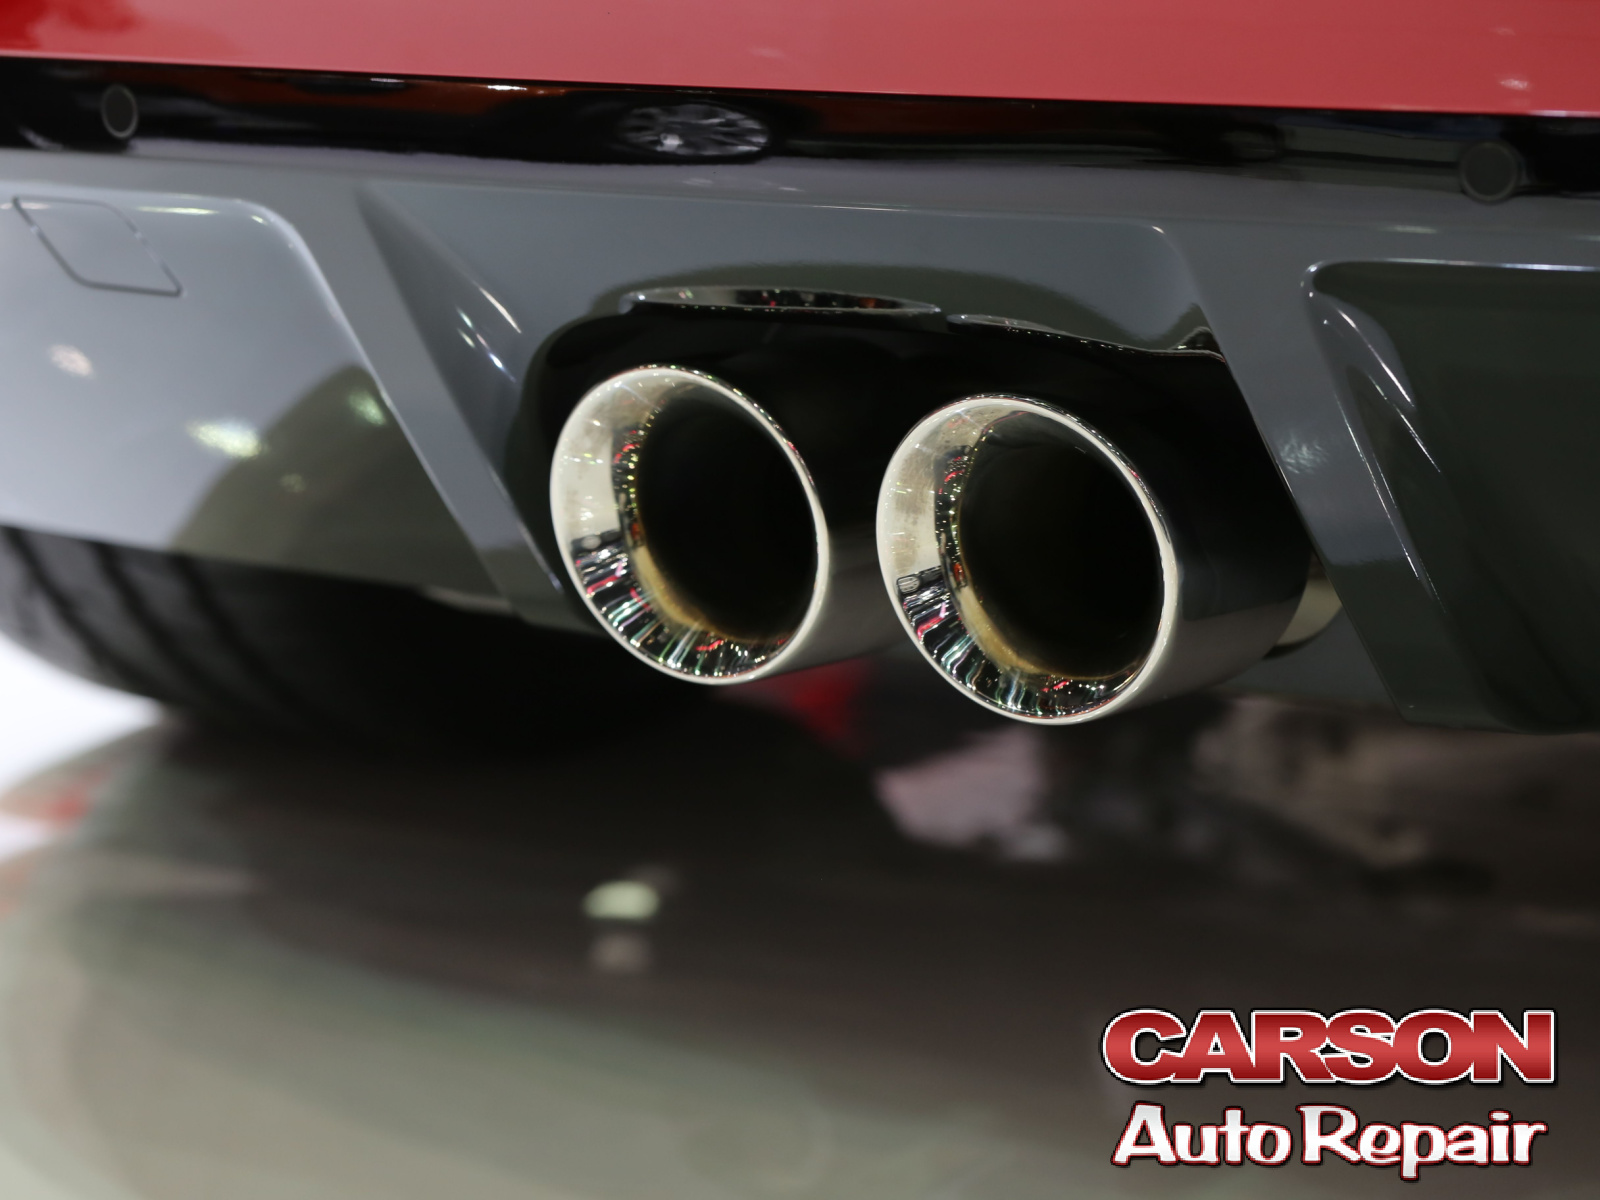 The Benefits of Exhaust Repair with Carson Auto Repair